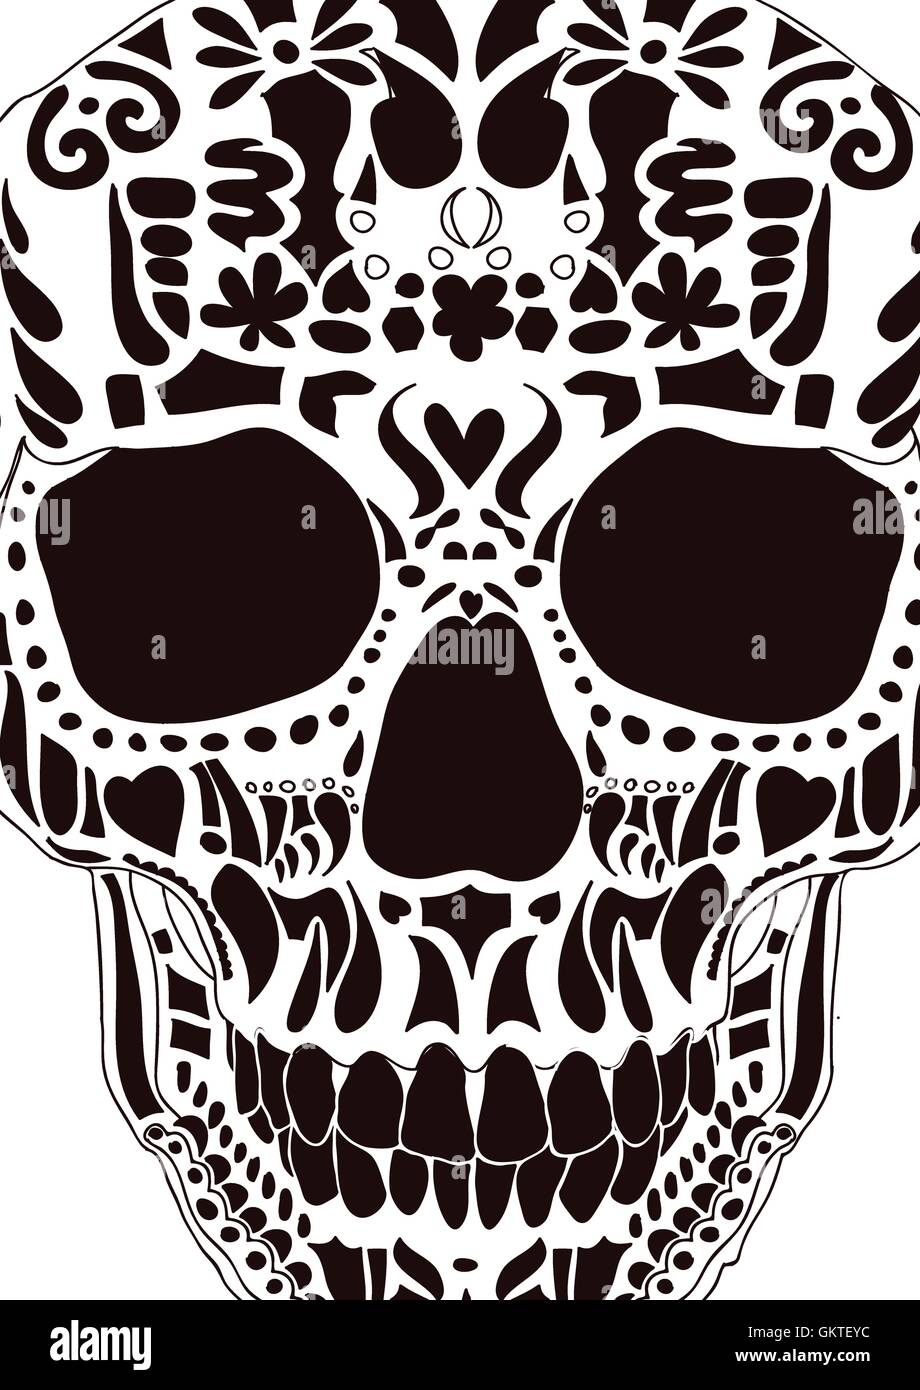 Ornamental scull as abstract floral illustration on background for design Stock Vector